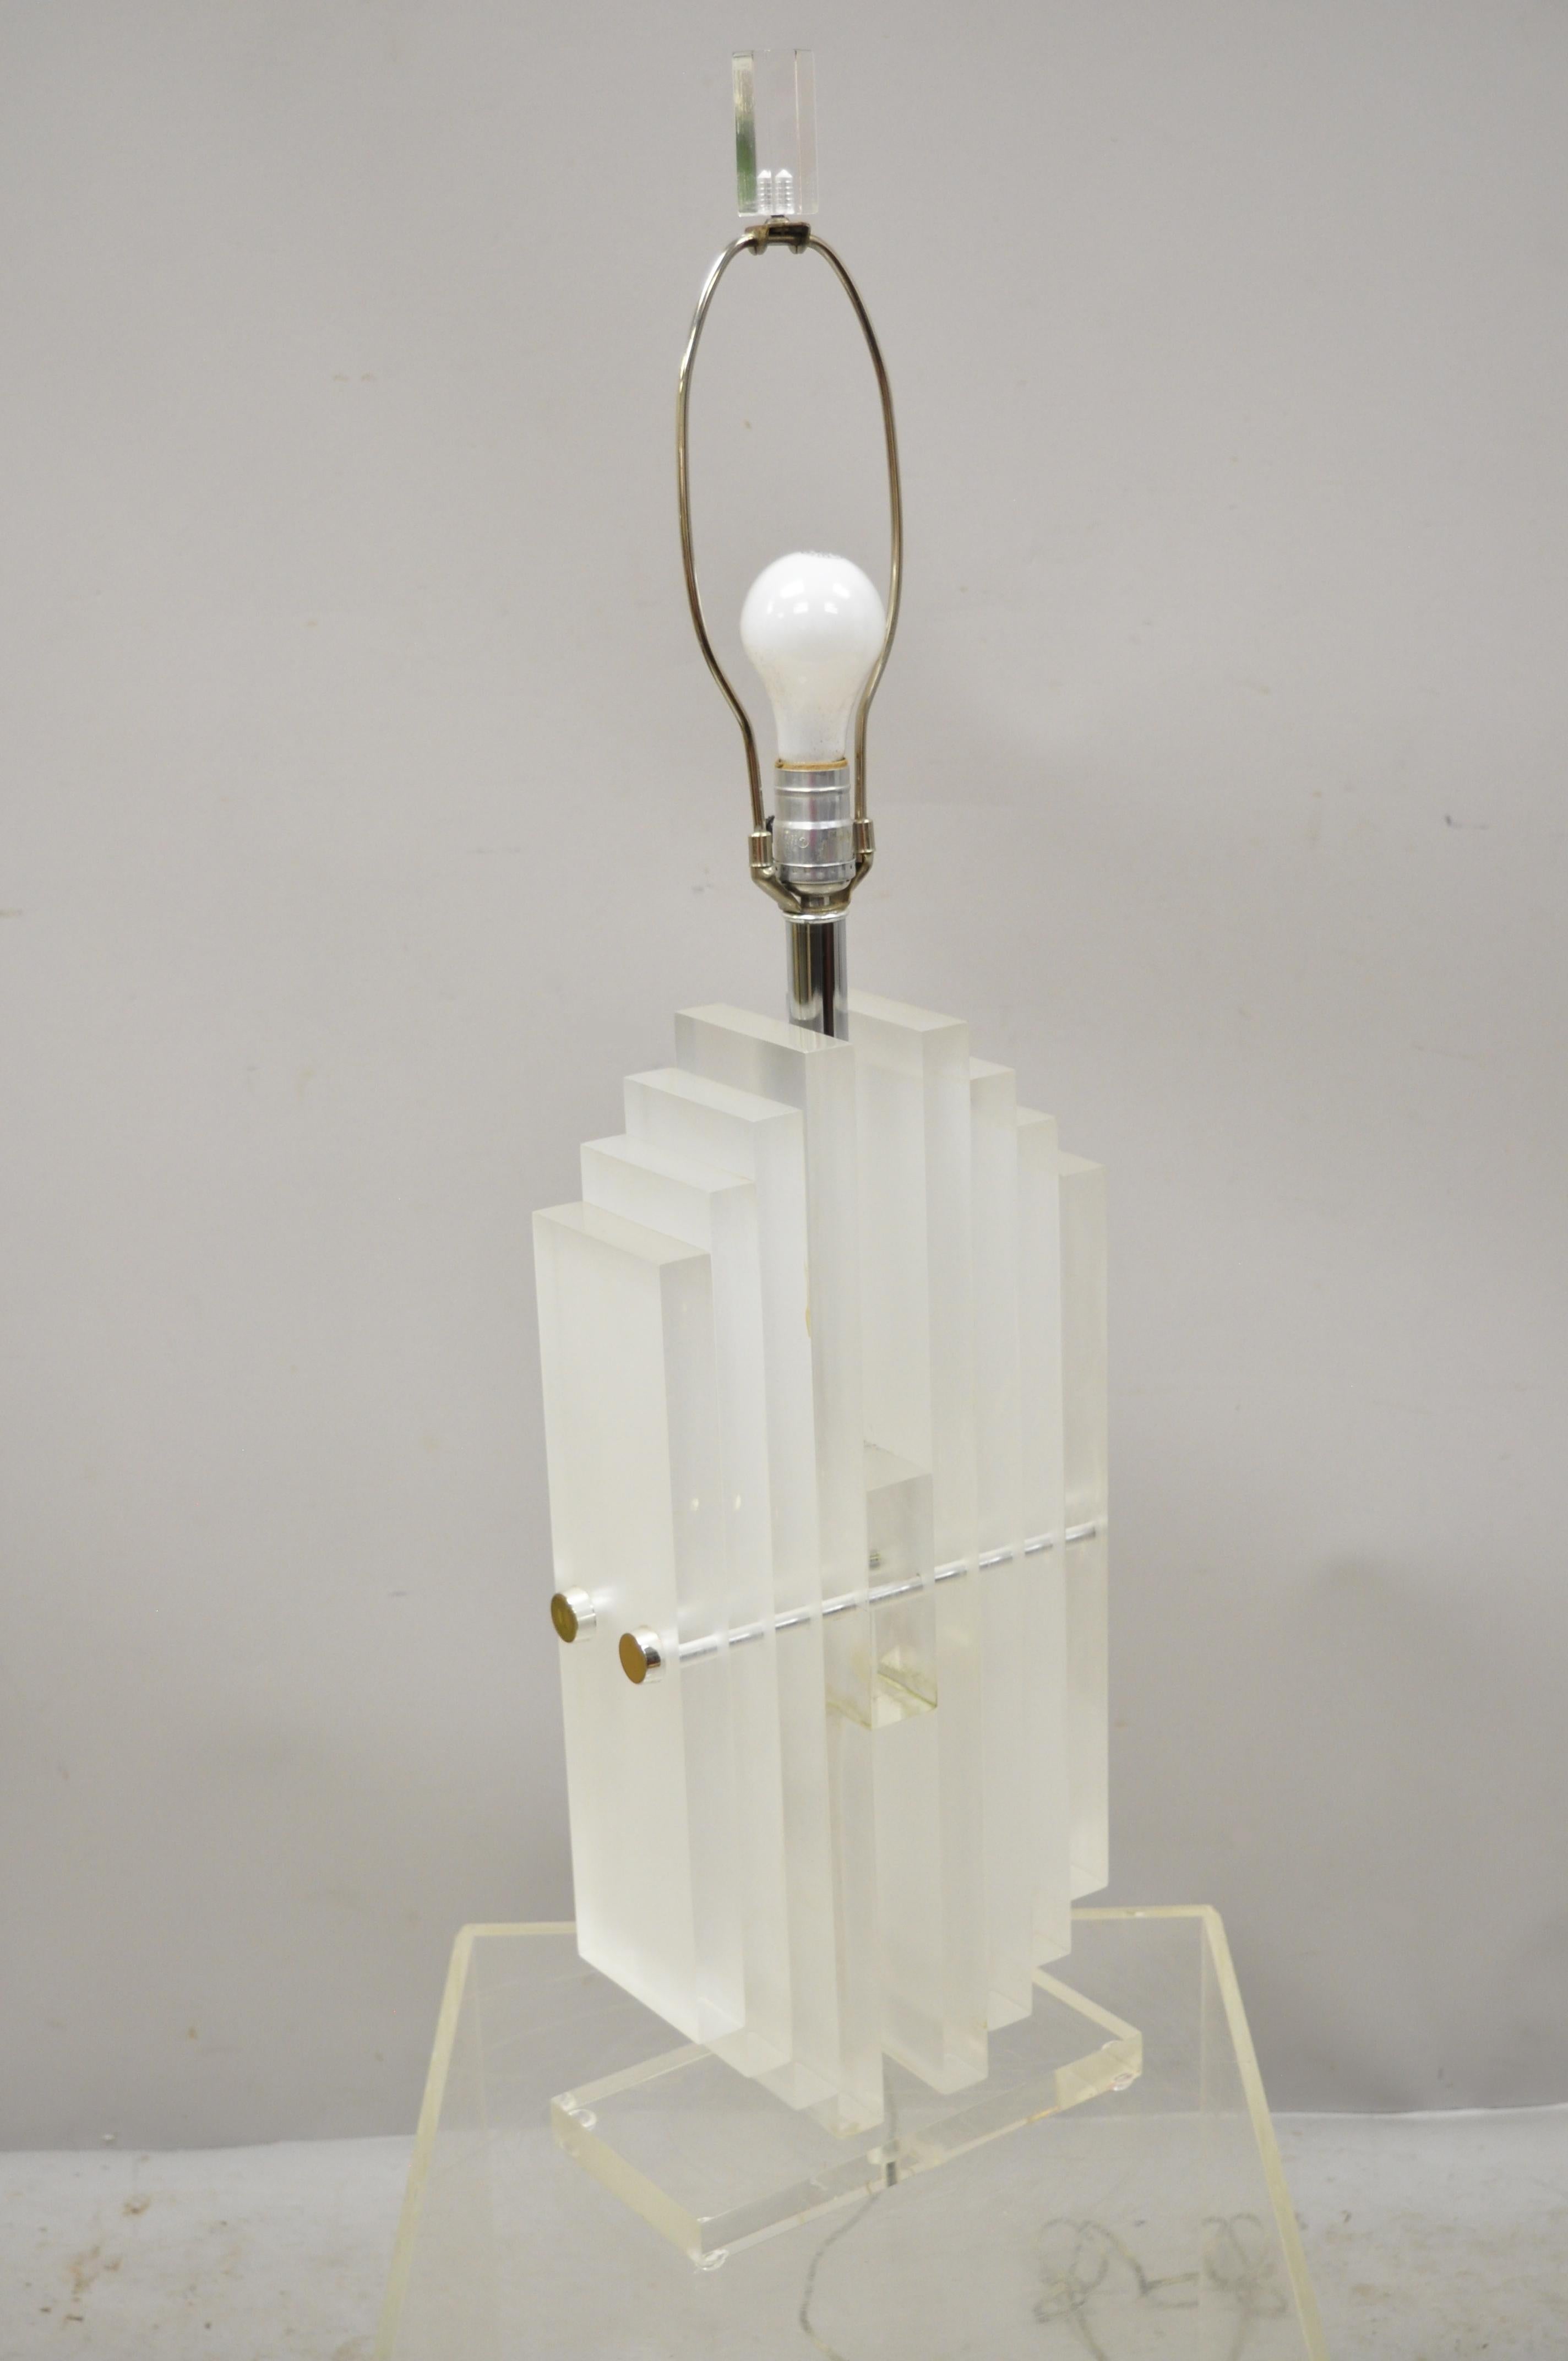 Vintage Mid-Century Modern heavy stacked Lucite Karl Springer style table lamp. Item features a chrome shaft, heavy stacked Lucite body, Lucite finial, very nice vintage item, clean modernist lines, quality American craftsmanship. Measurements: